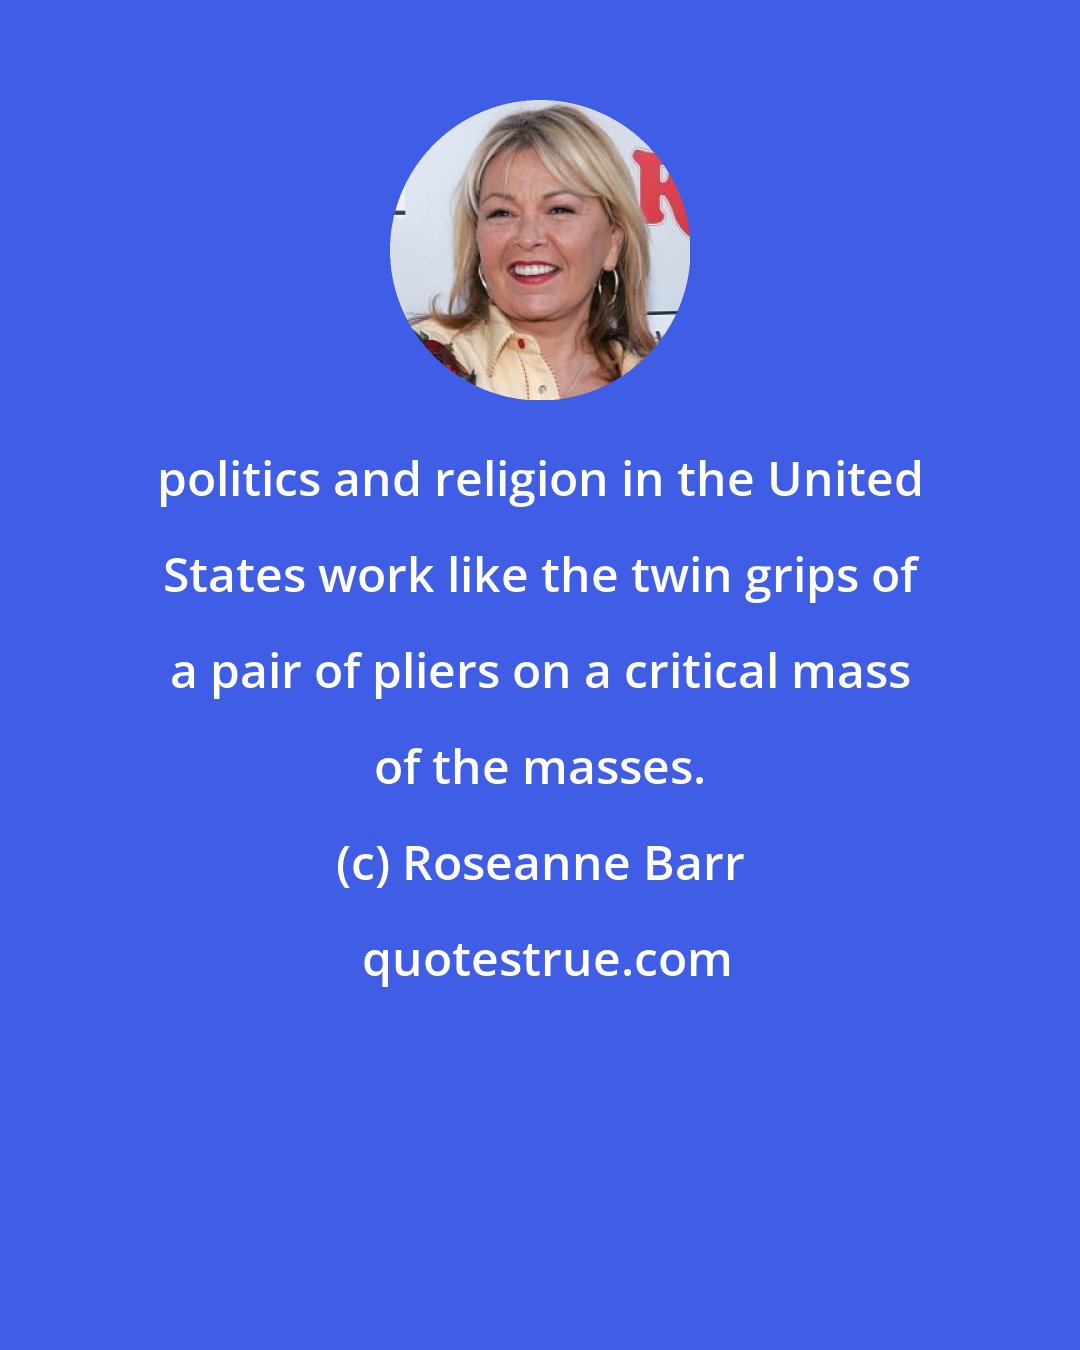 Roseanne Barr: politics and religion in the United States work like the twin grips of a pair of pliers on a critical mass of the masses.